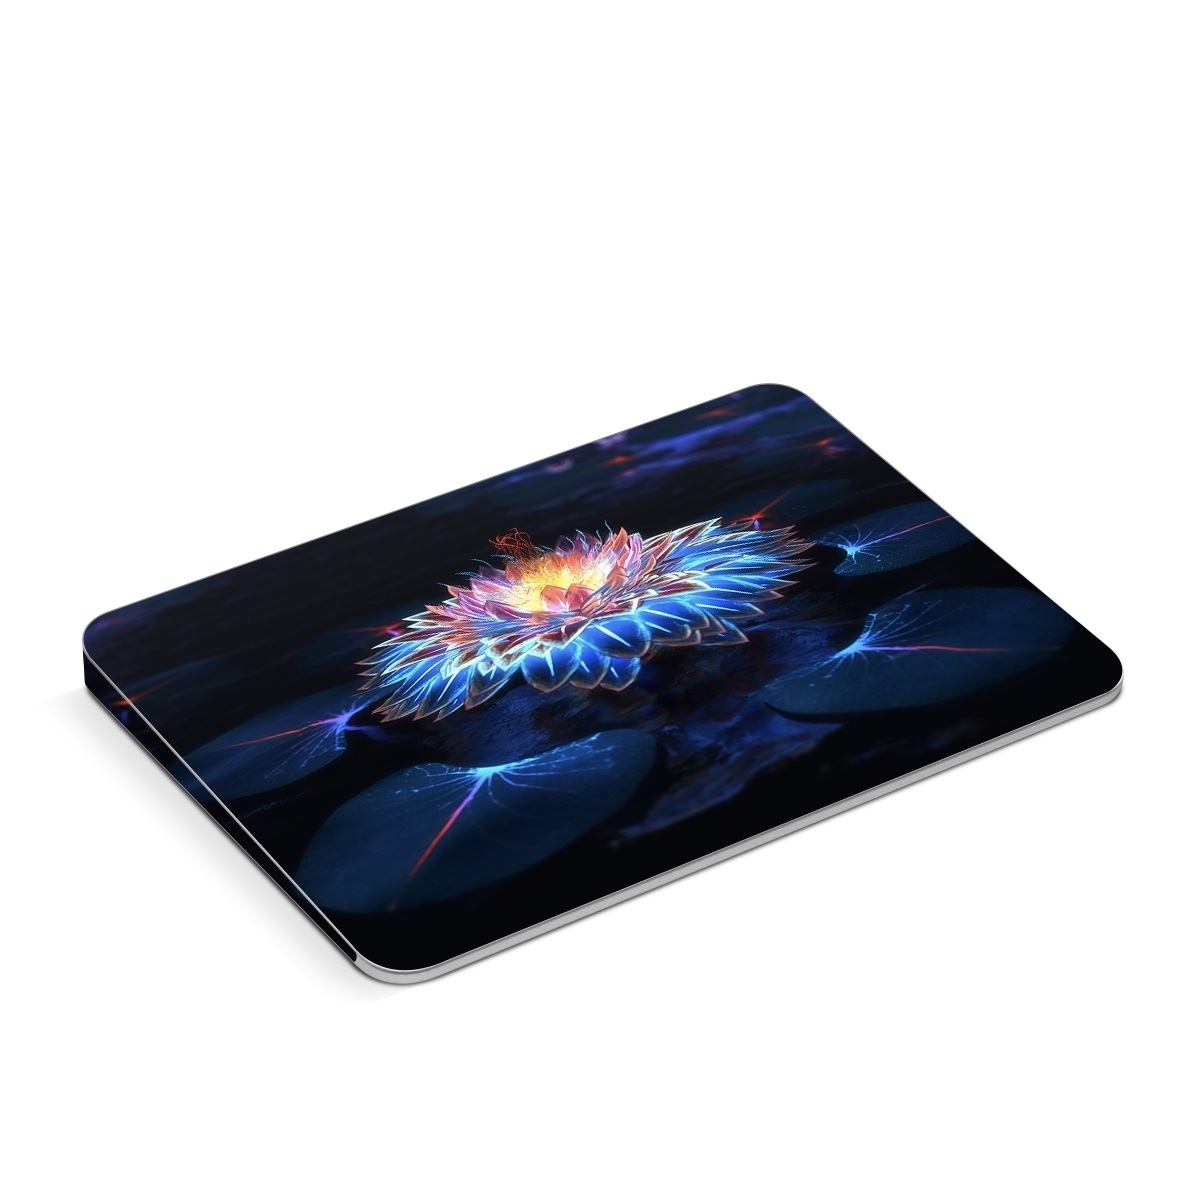 Apple Magic Trackpad Skin design of Water, Light, Fractal art, Organism, Electric blue, Aquatic plant, Darkness, Plant, Art, Space, with black, blue, gray colors